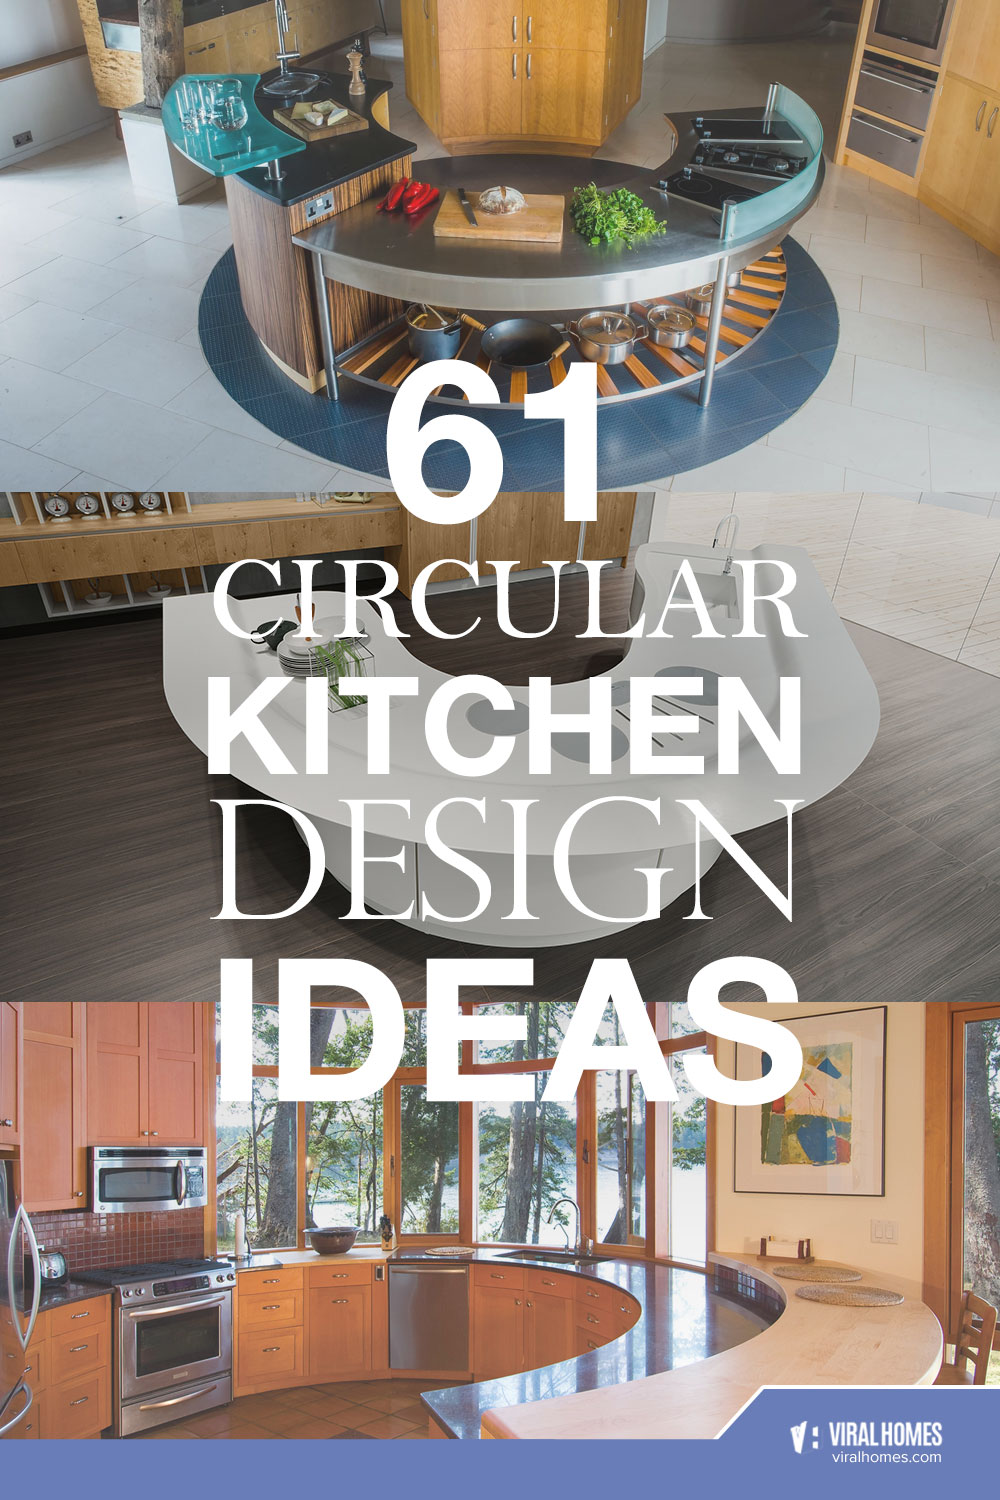 Cool Circular Kitchen Ideas for the Creative Homemakers